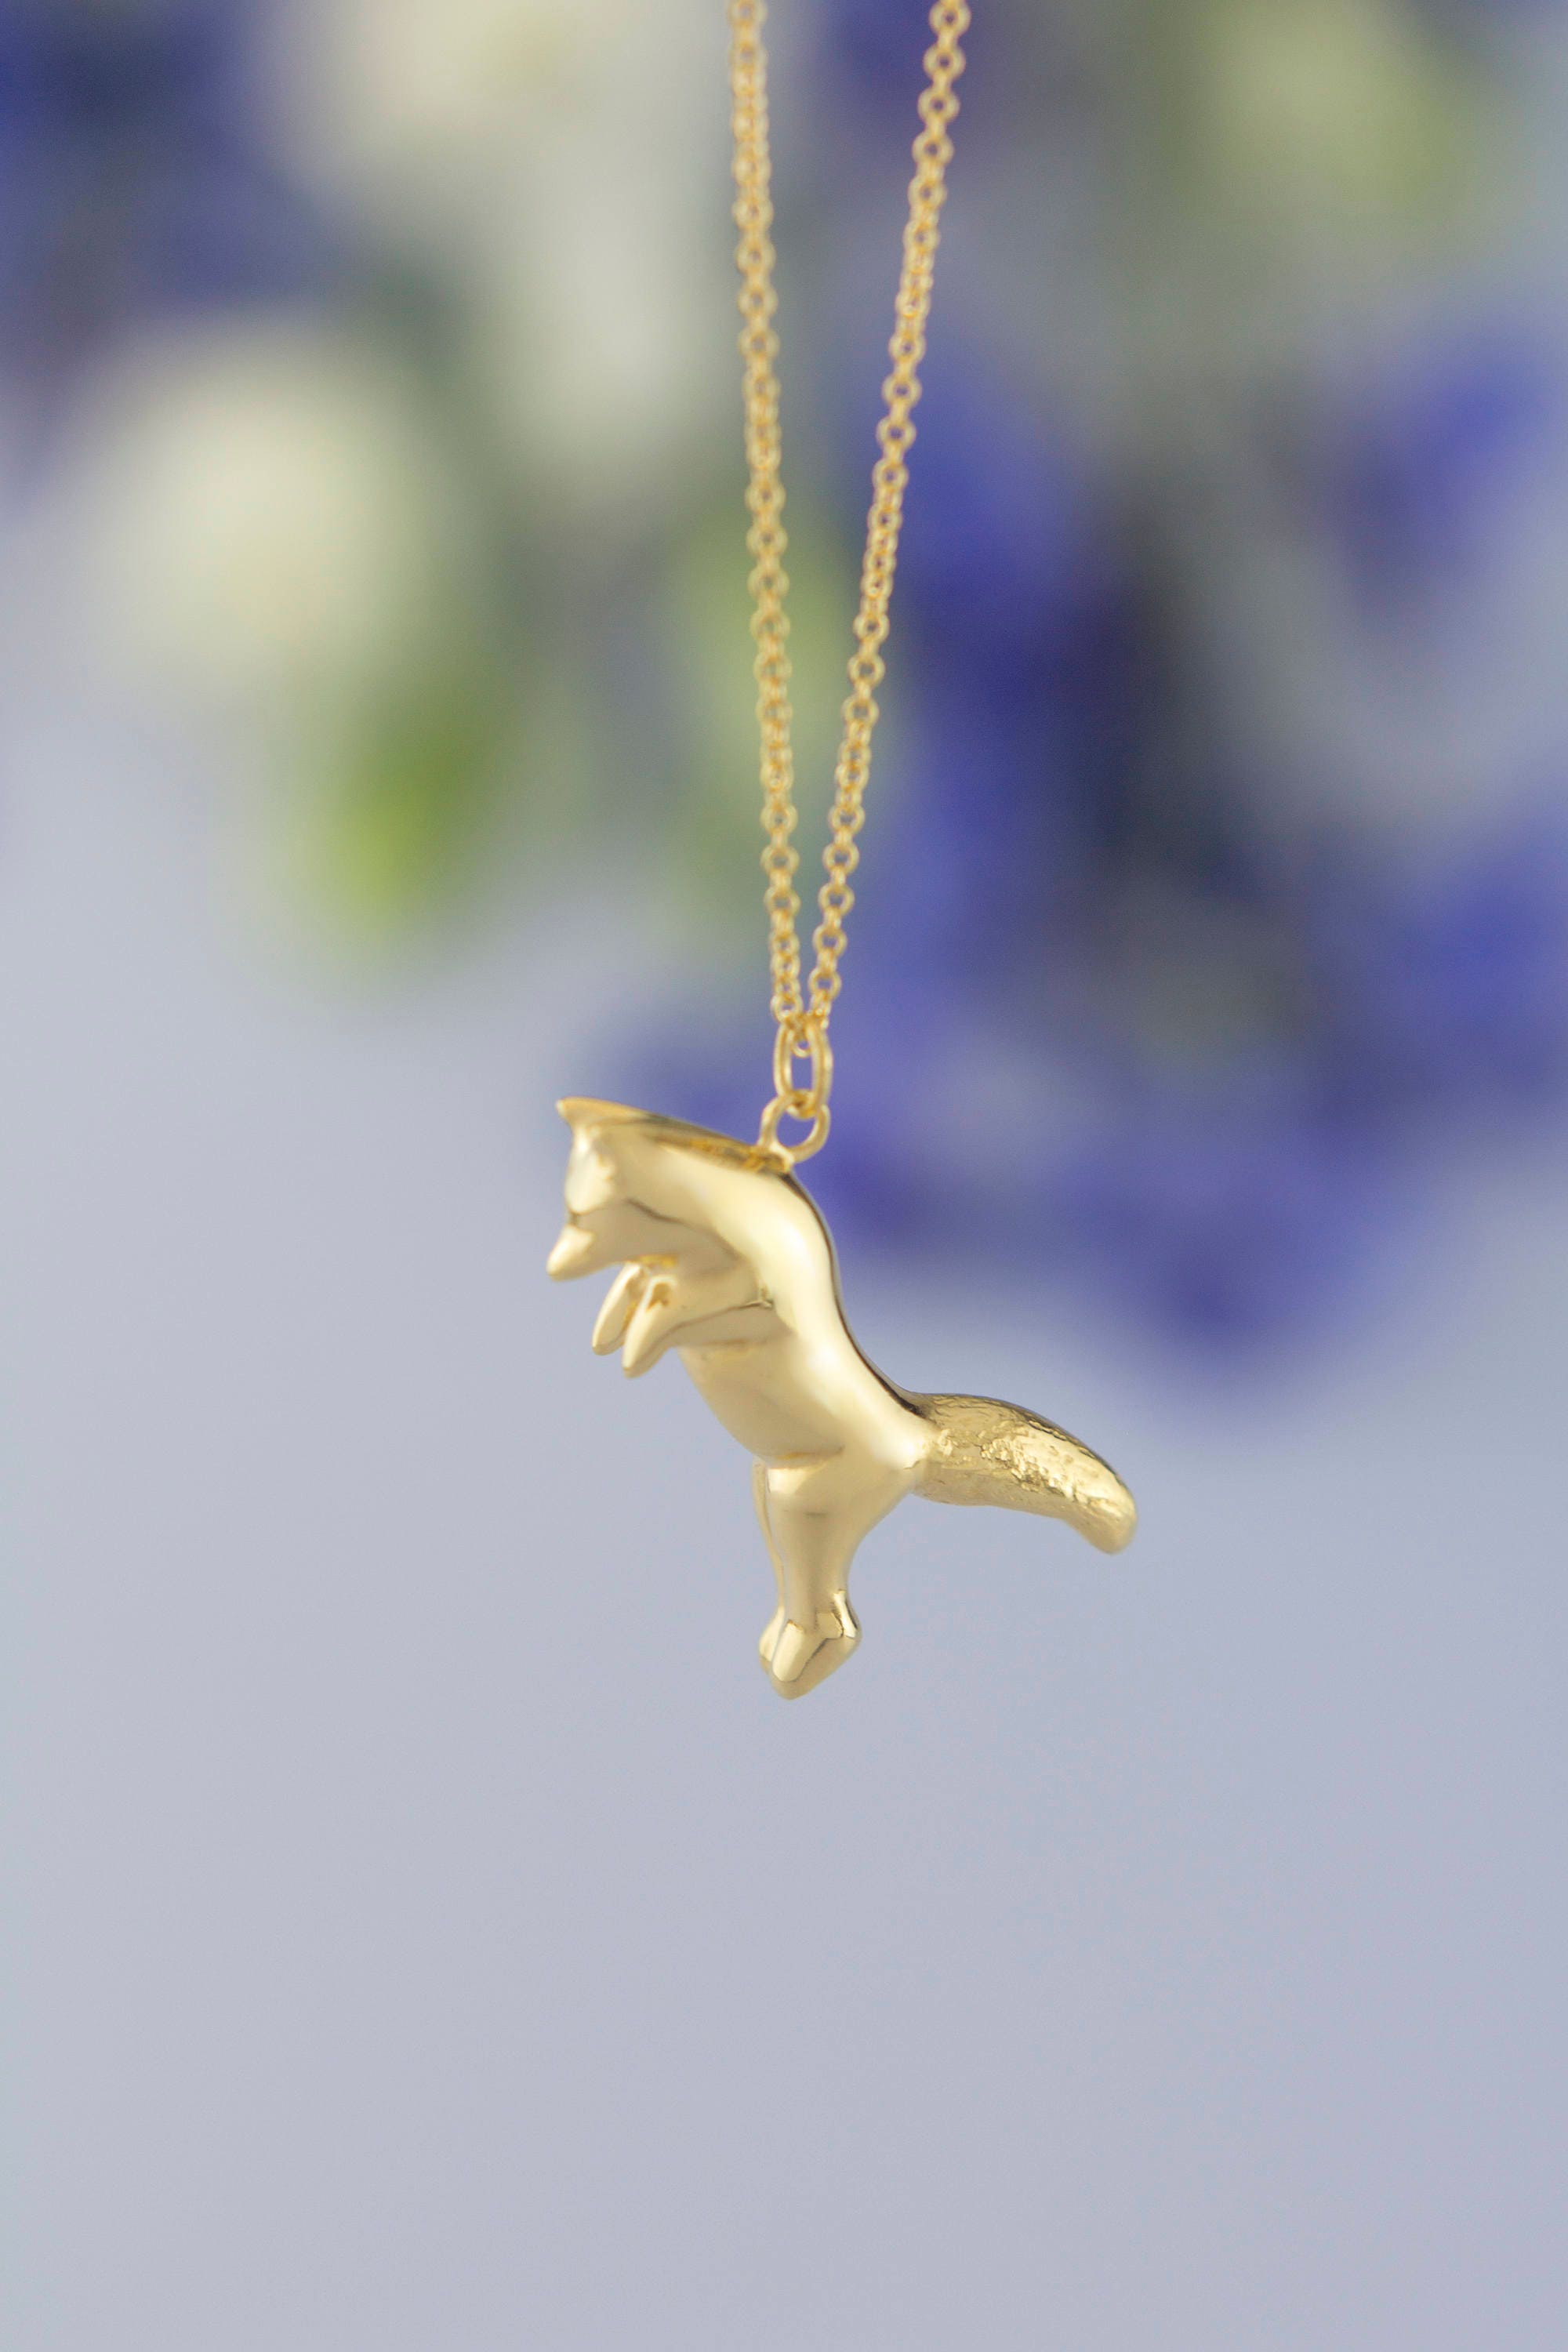 Solid Gold Pouncing Fox Necklace. 9Ct 18Ct Or 22Ct. Hand Carved Design. Wildlife Personalised Animal Pendant By Rosalind Elunyd Jewellery